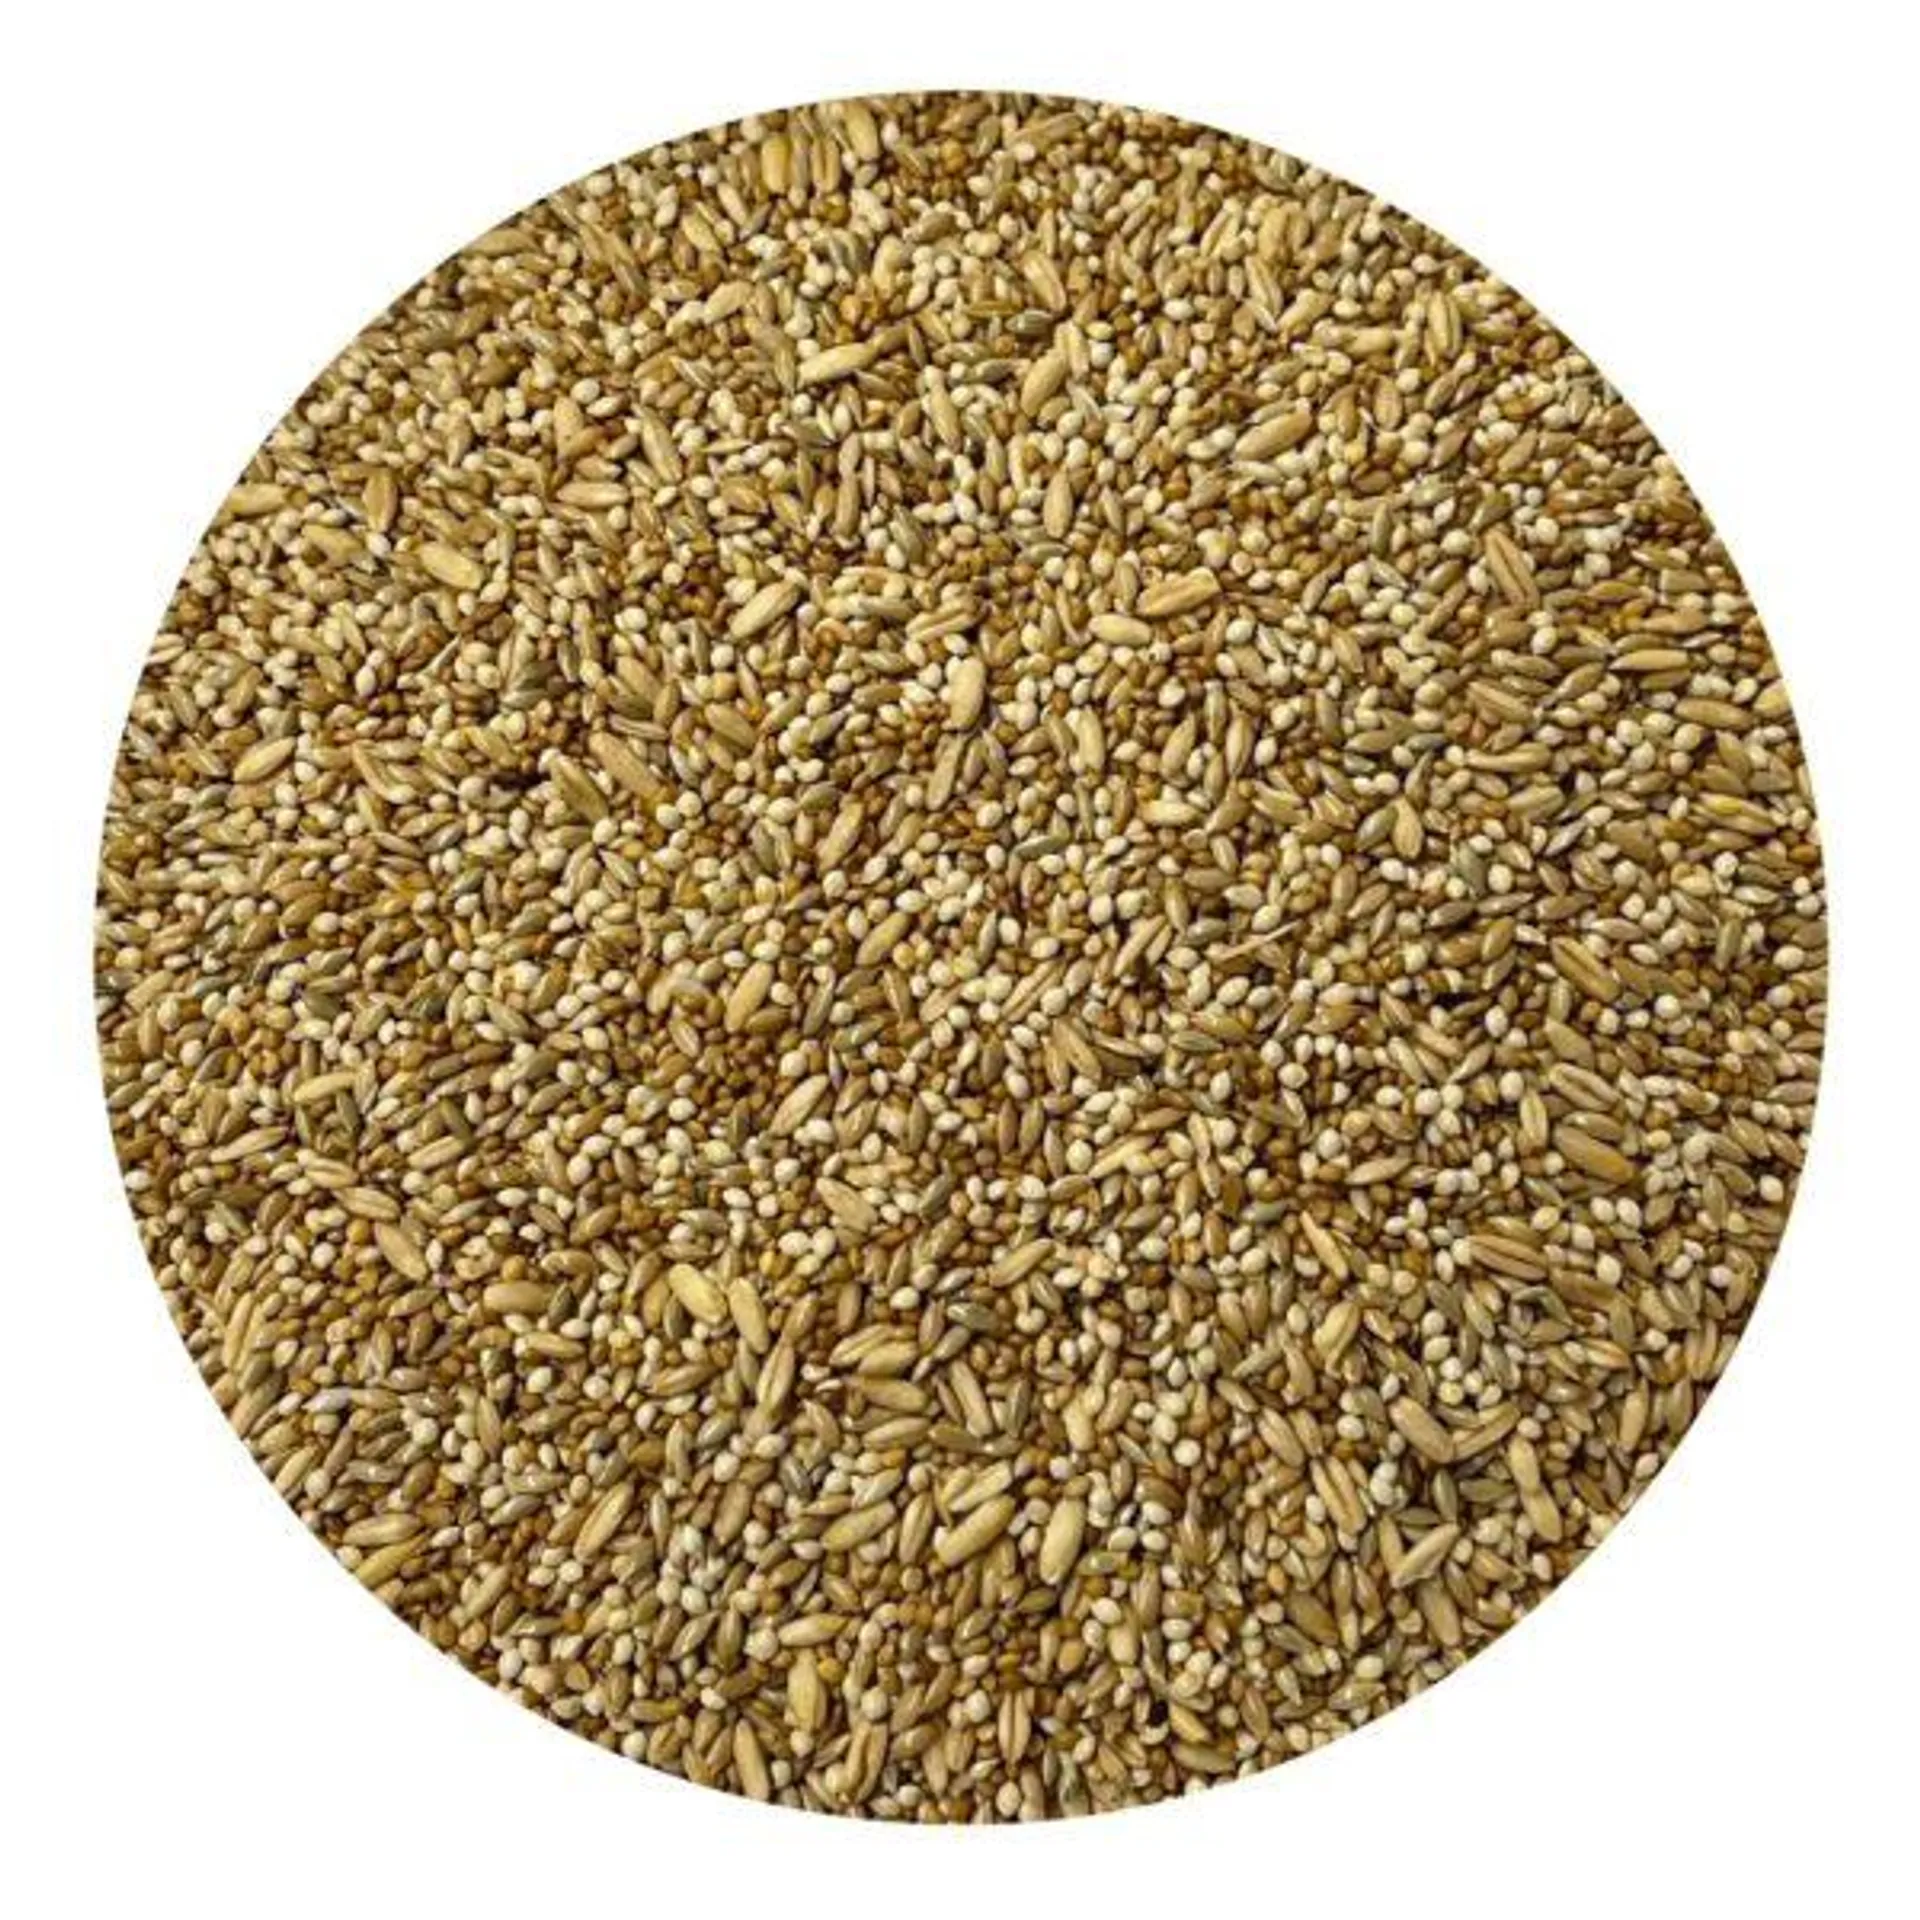 Budgie Seed Mix 20kg